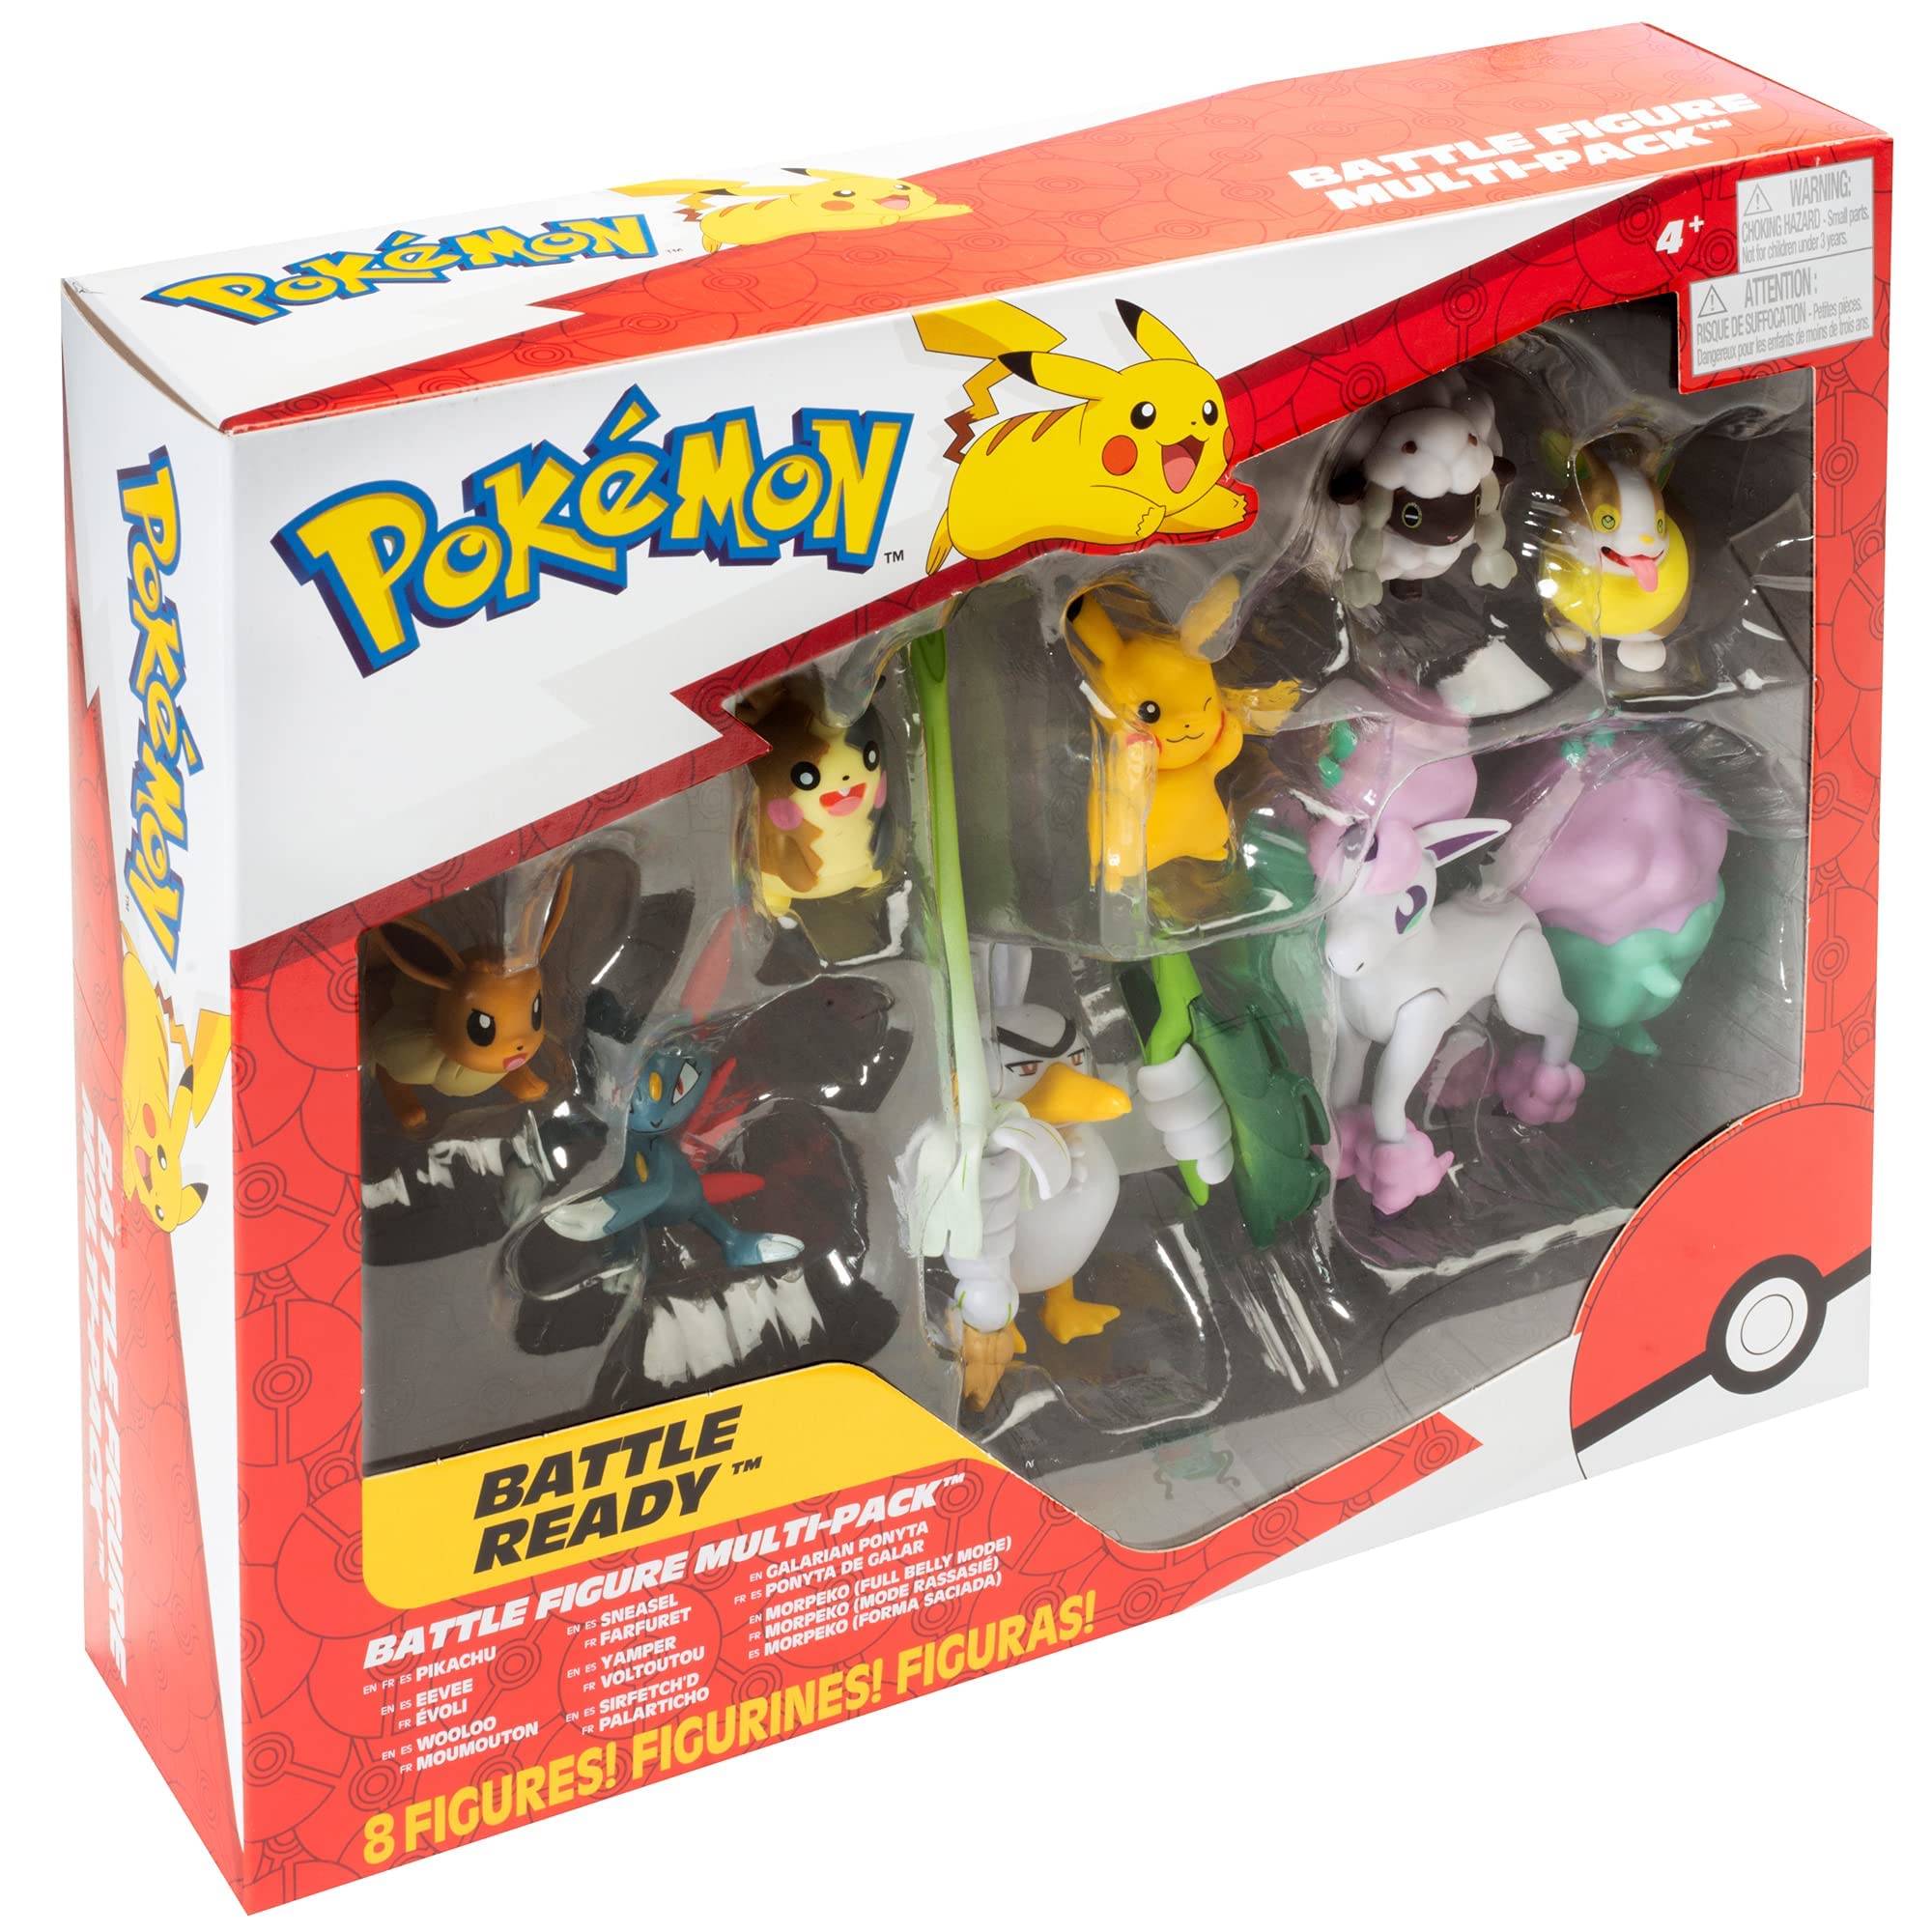 Pokémon Battle Figure Multi Pack Toy Set, 8 Pieces - Generation 8 - Includes Pikachu, Eevee, Wooloo, Sneasel, Yamper, Ponyta, Sirfetch'd & Morpeko - Gift for Kids, Ages 4+